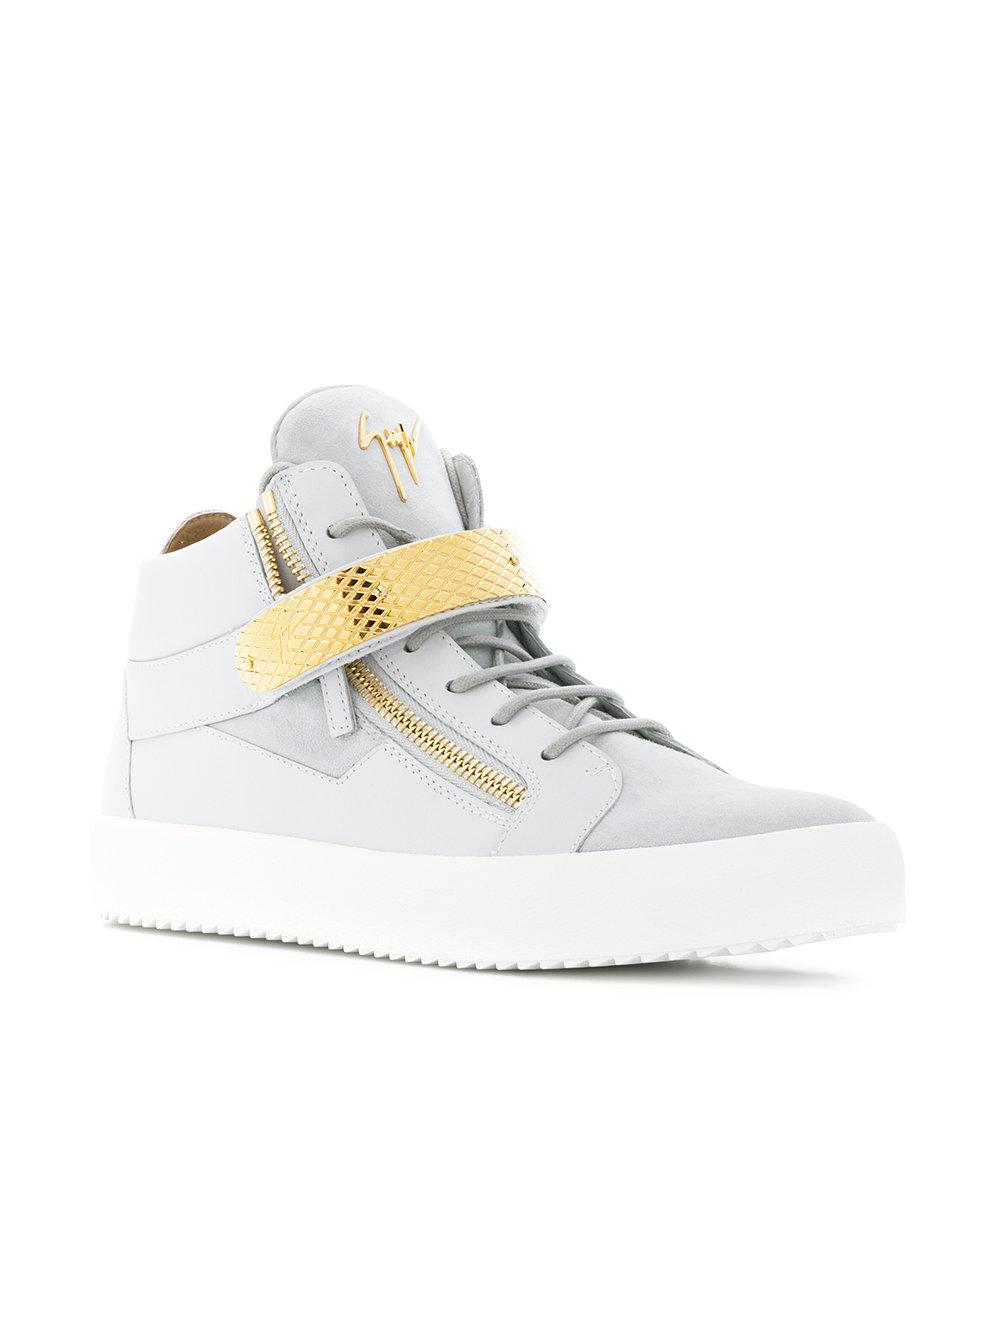 Giuseppe Zanotti Leather Coby Hi-top Sneakers in Grey (Gray) for Men - Lyst